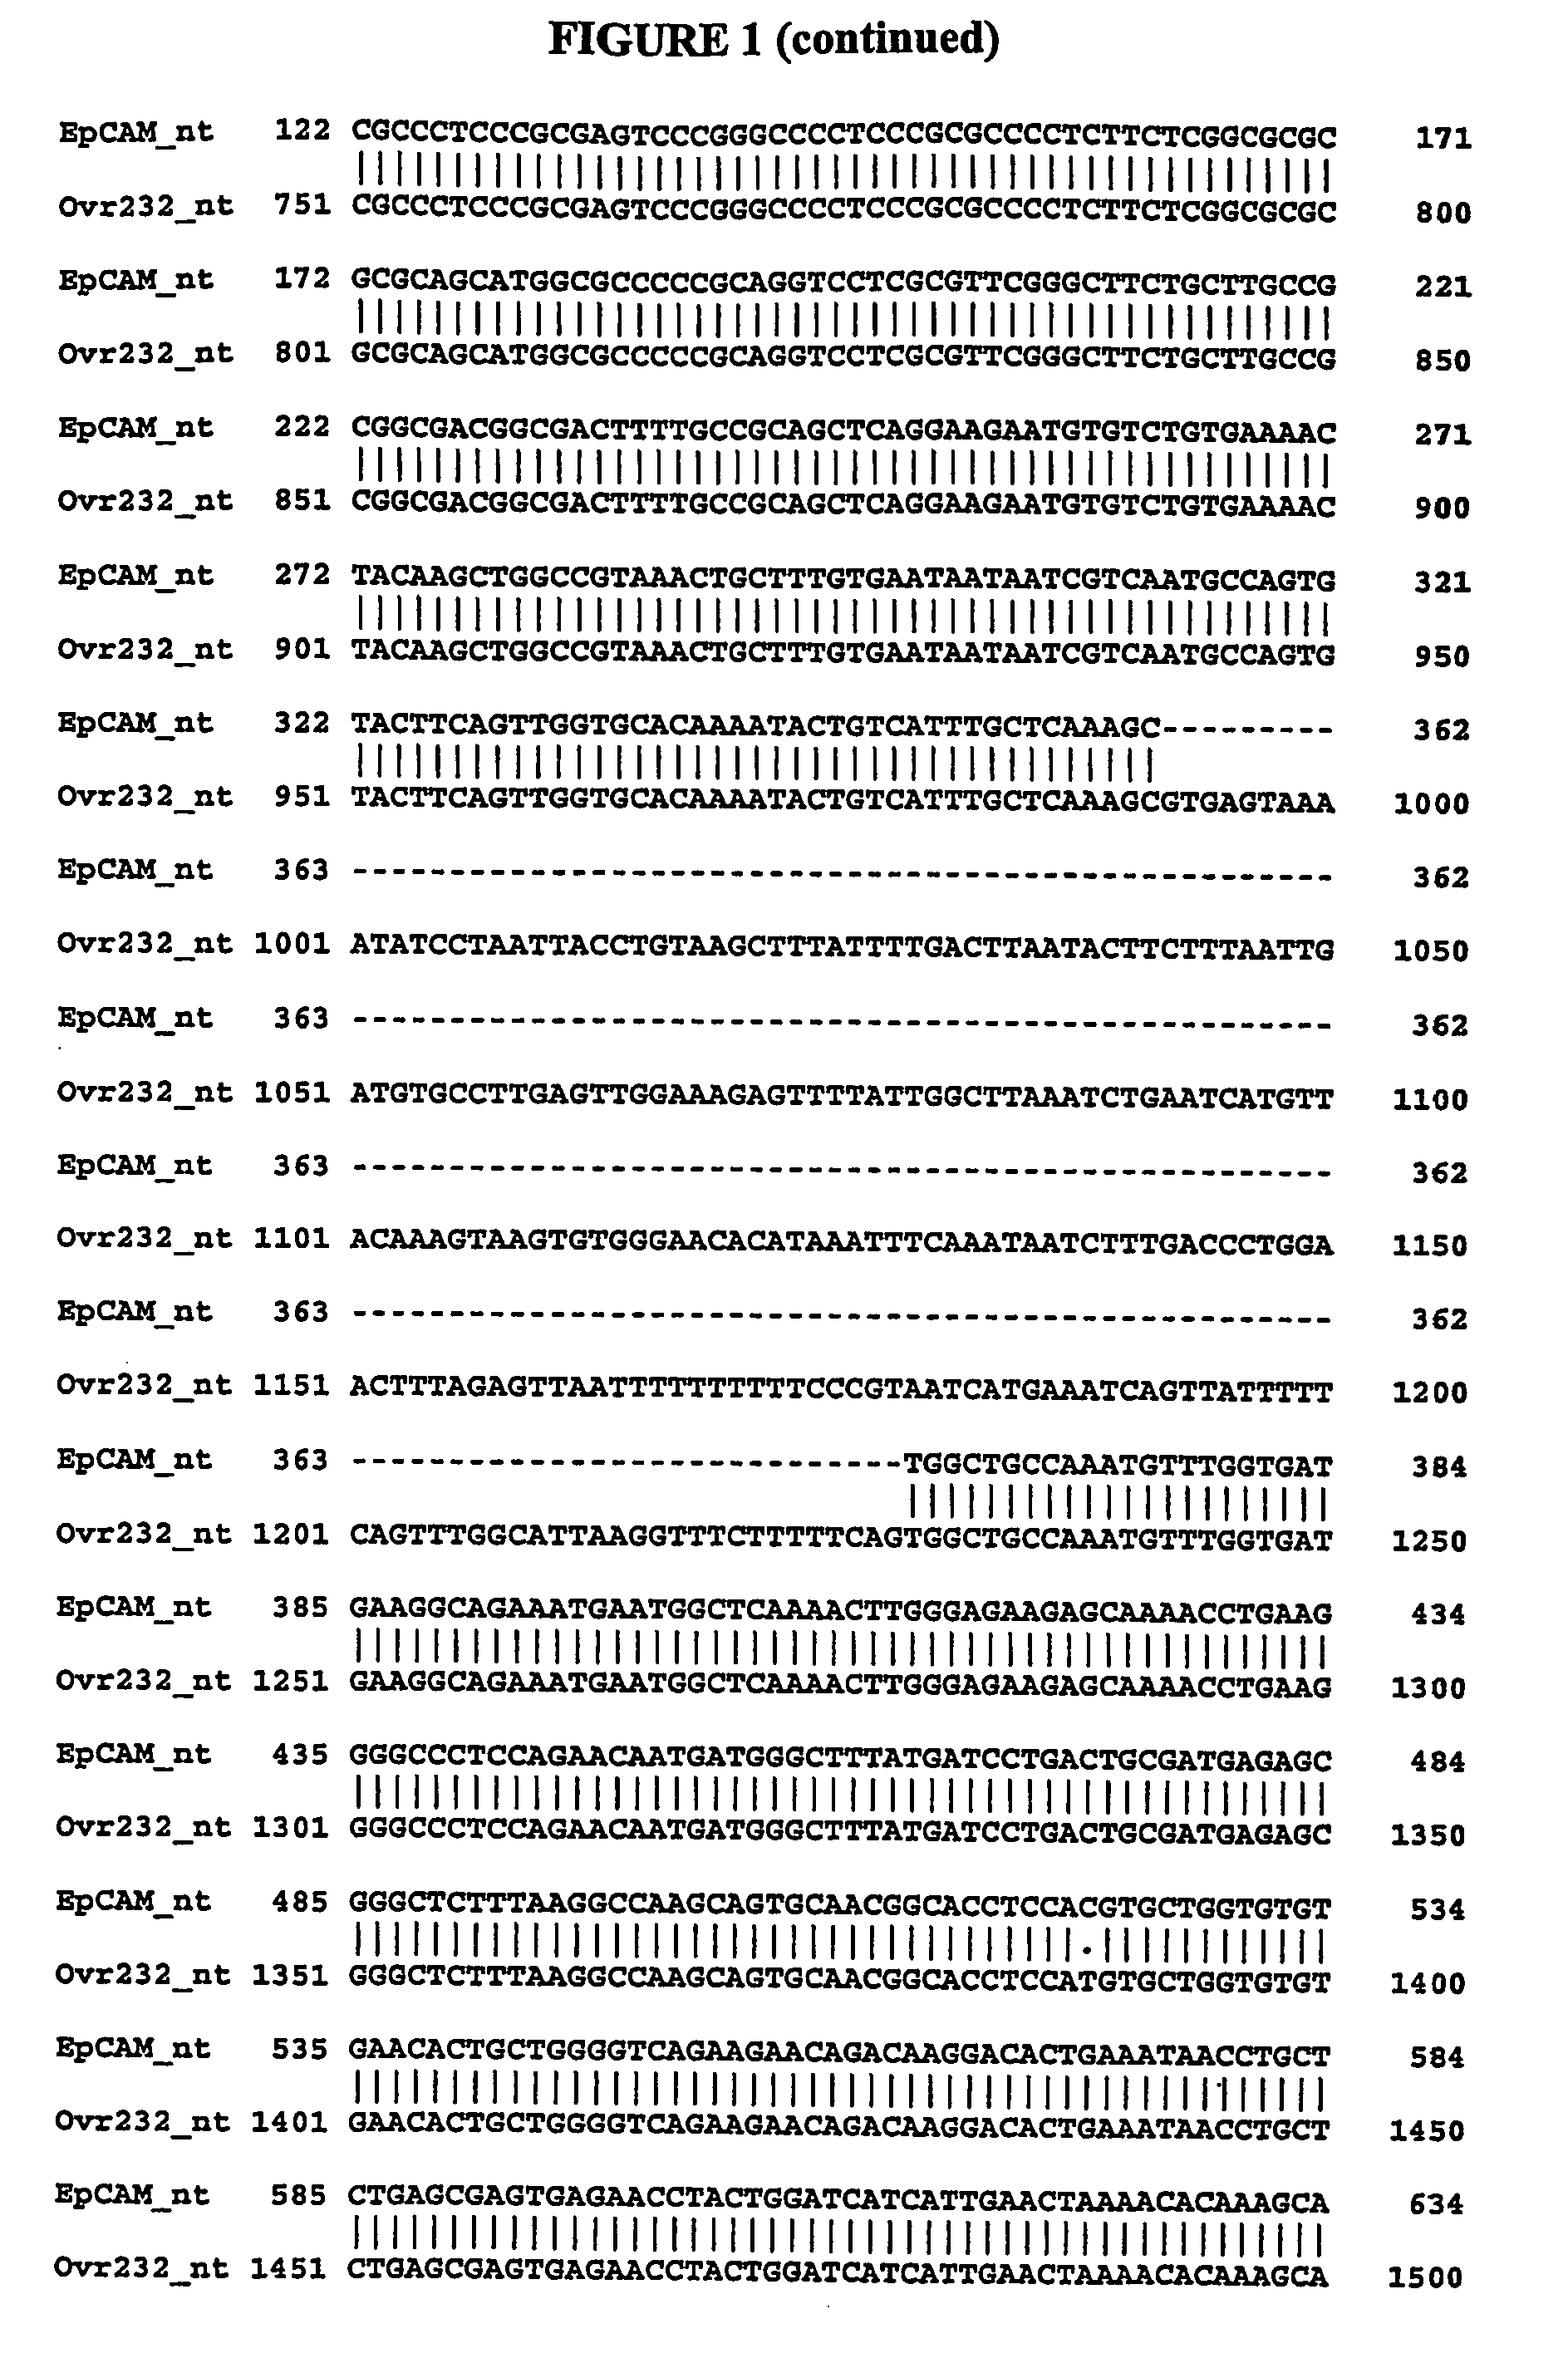 Composition, splice variants and methods relating to ovarian specific genes and proteins